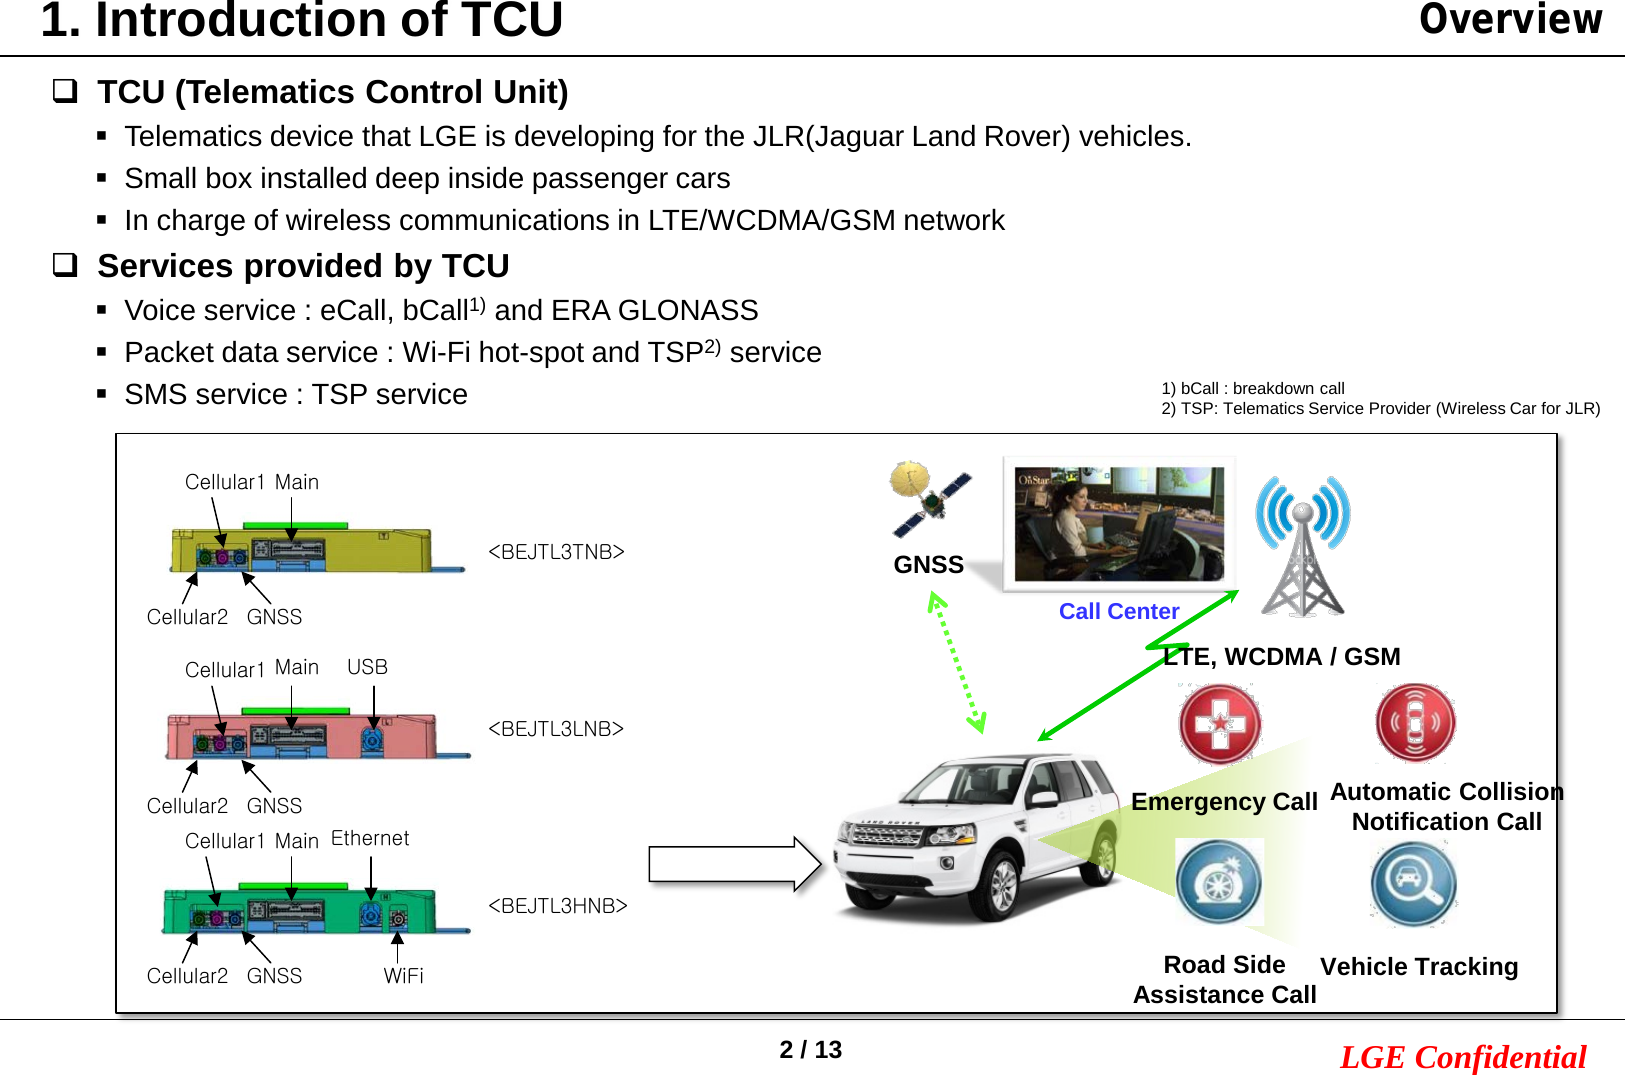 2/ 13 LGE Confidential1. Introduction of TCUTCU (Telematics Control Unit)Telematics device that LGE is developing for the JLR(Jaguar Land Rover) vehicles.Small box installed deep inside passenger carsIn charge of wireless communications in LTE/WCDMA/GSM networkServices provided by TCUVoice service : eCall, bCall1) and ERA GLONASSPacket data service : Wi-Fi hot-spot and TSP2) serviceSMS service : TSP serviceCall CenterGNSSEmergency Call Automatic CollisionNotification CallRoad SideAssistance CallVehicle TrackingLTE, WCDMA / GSMOverview1) bCall : breakdown call2) TSP: Telematics Service Provider (Wireless Car for JLR)&lt;BEJTL3TNB&gt;&lt;BEJTL3LNB&gt;&lt;BEJTL3HNB&gt;Cellular2Cellular1GNSSMainCellular2Cellular1GNSSCellular2Cellular1GNSSMainMainUSBEthernetWiFi